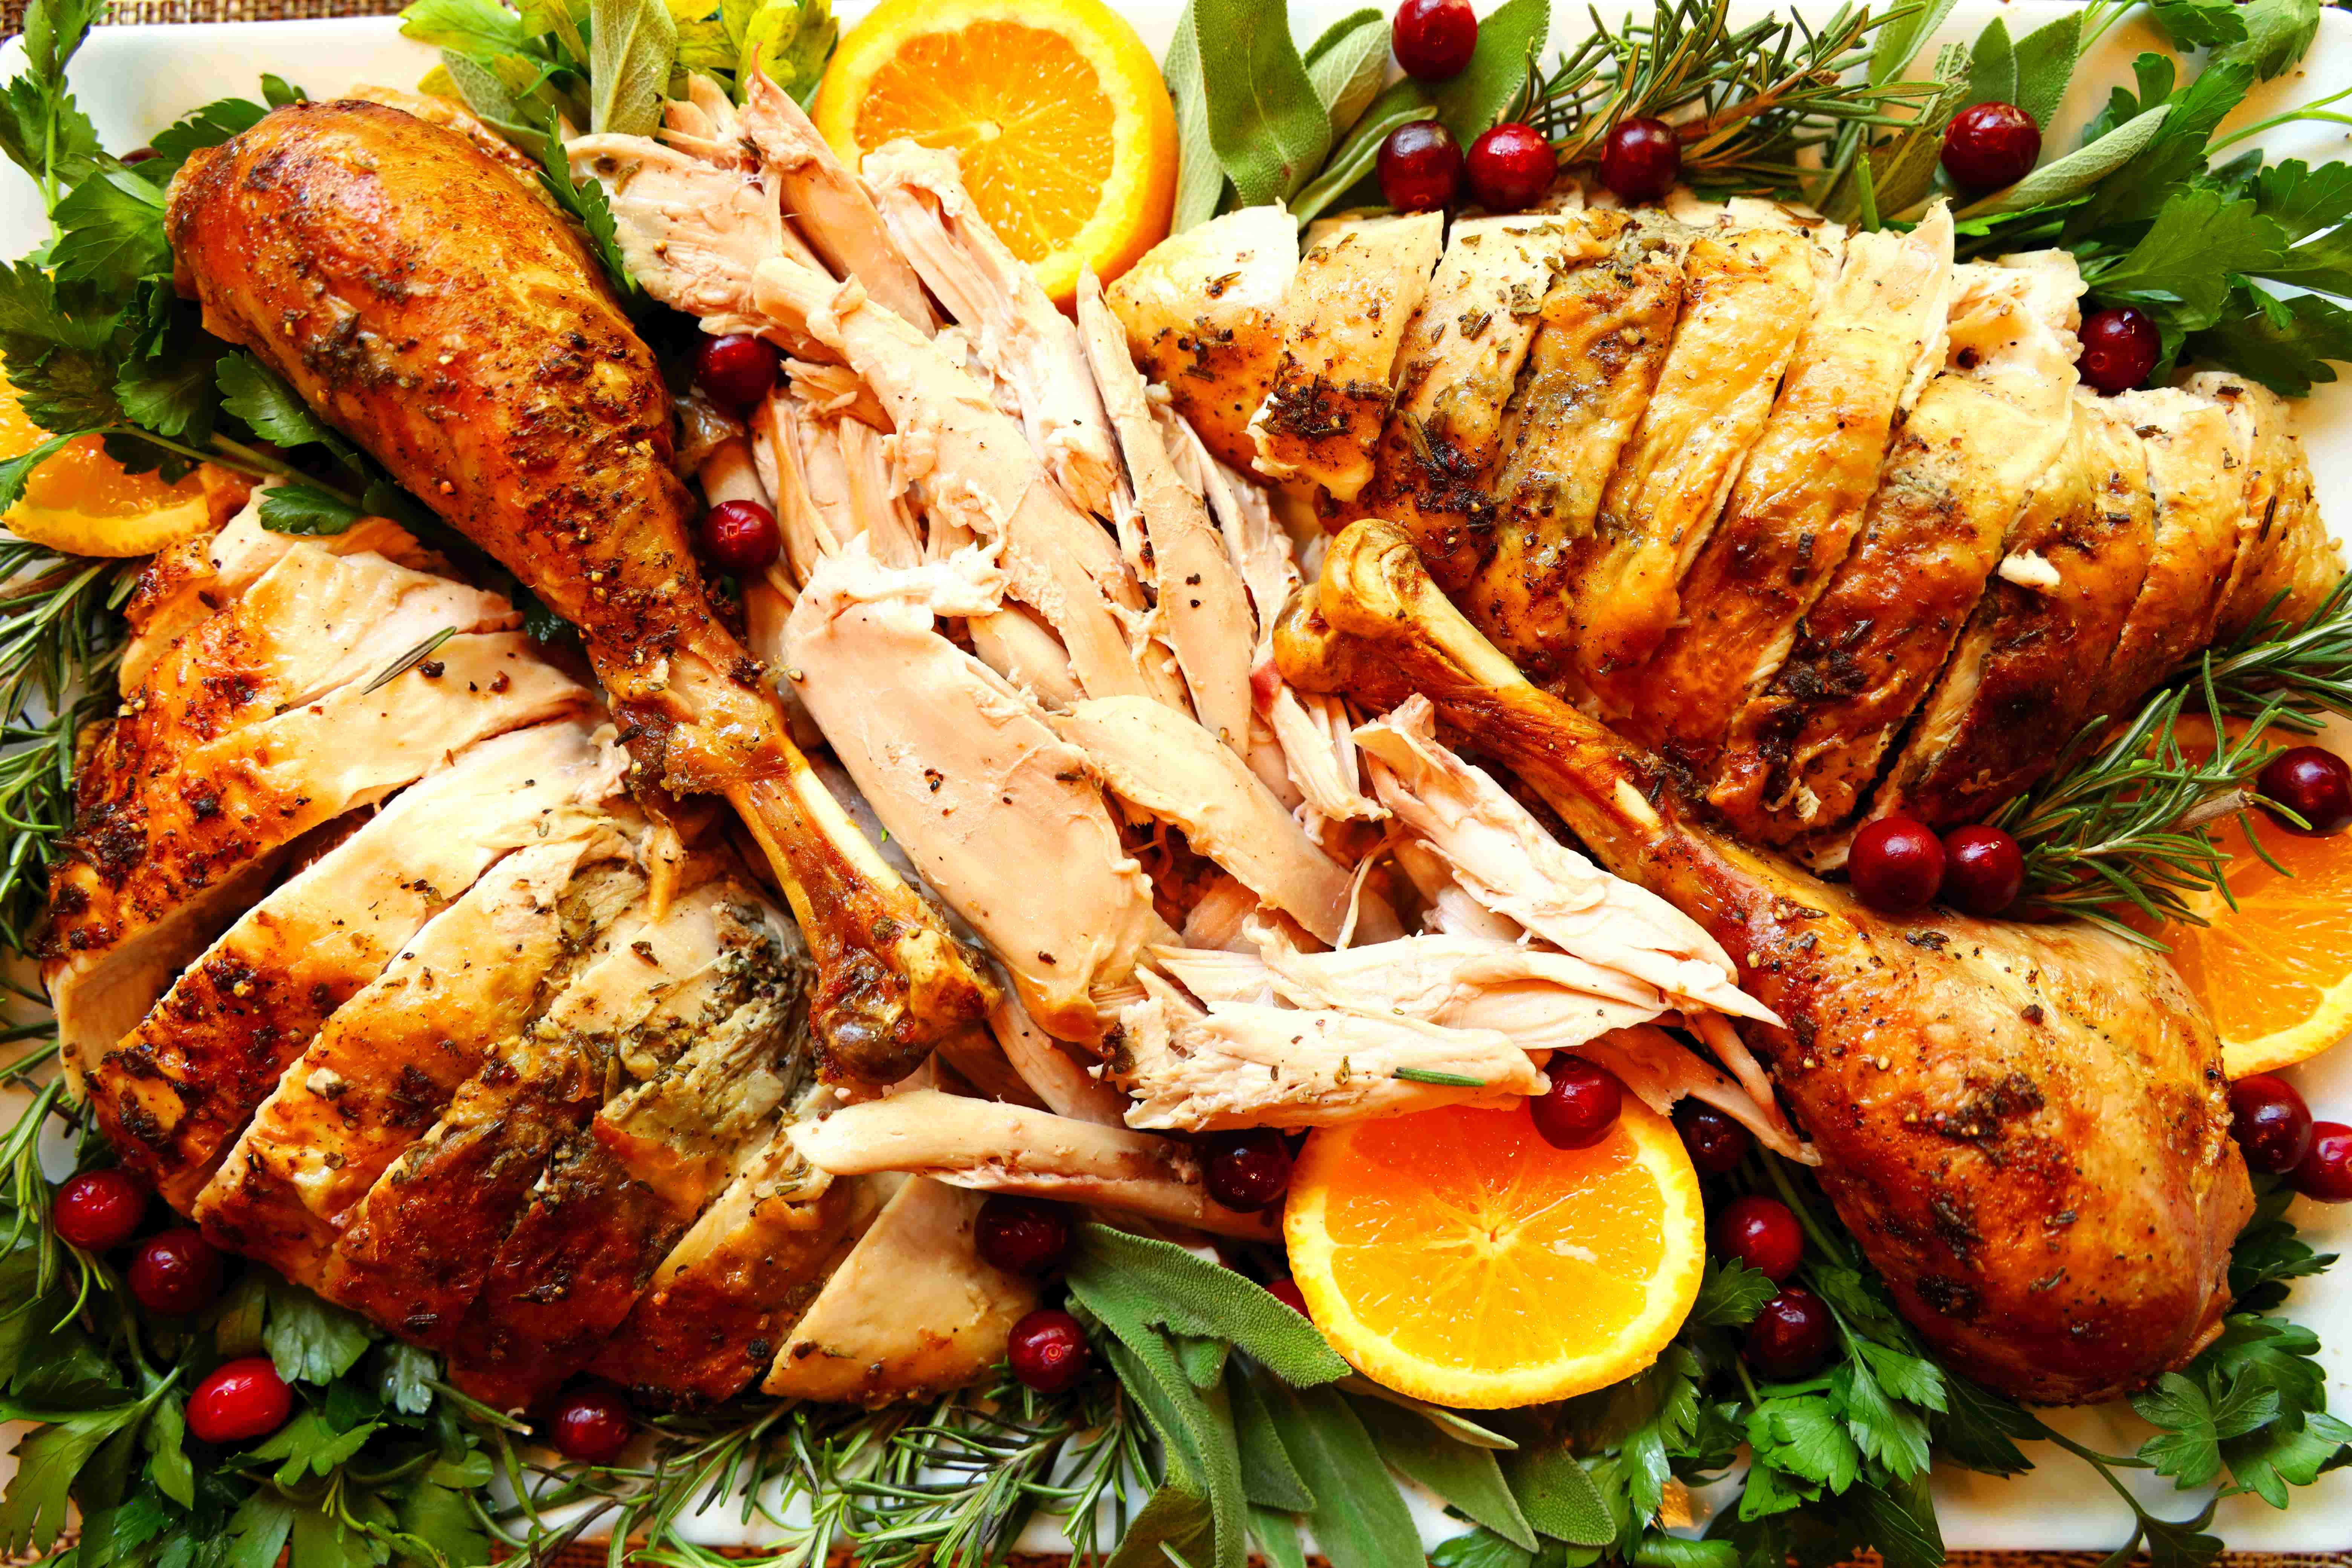 Turkey cut up on a platter with parsley and oranges and cranberries around it.